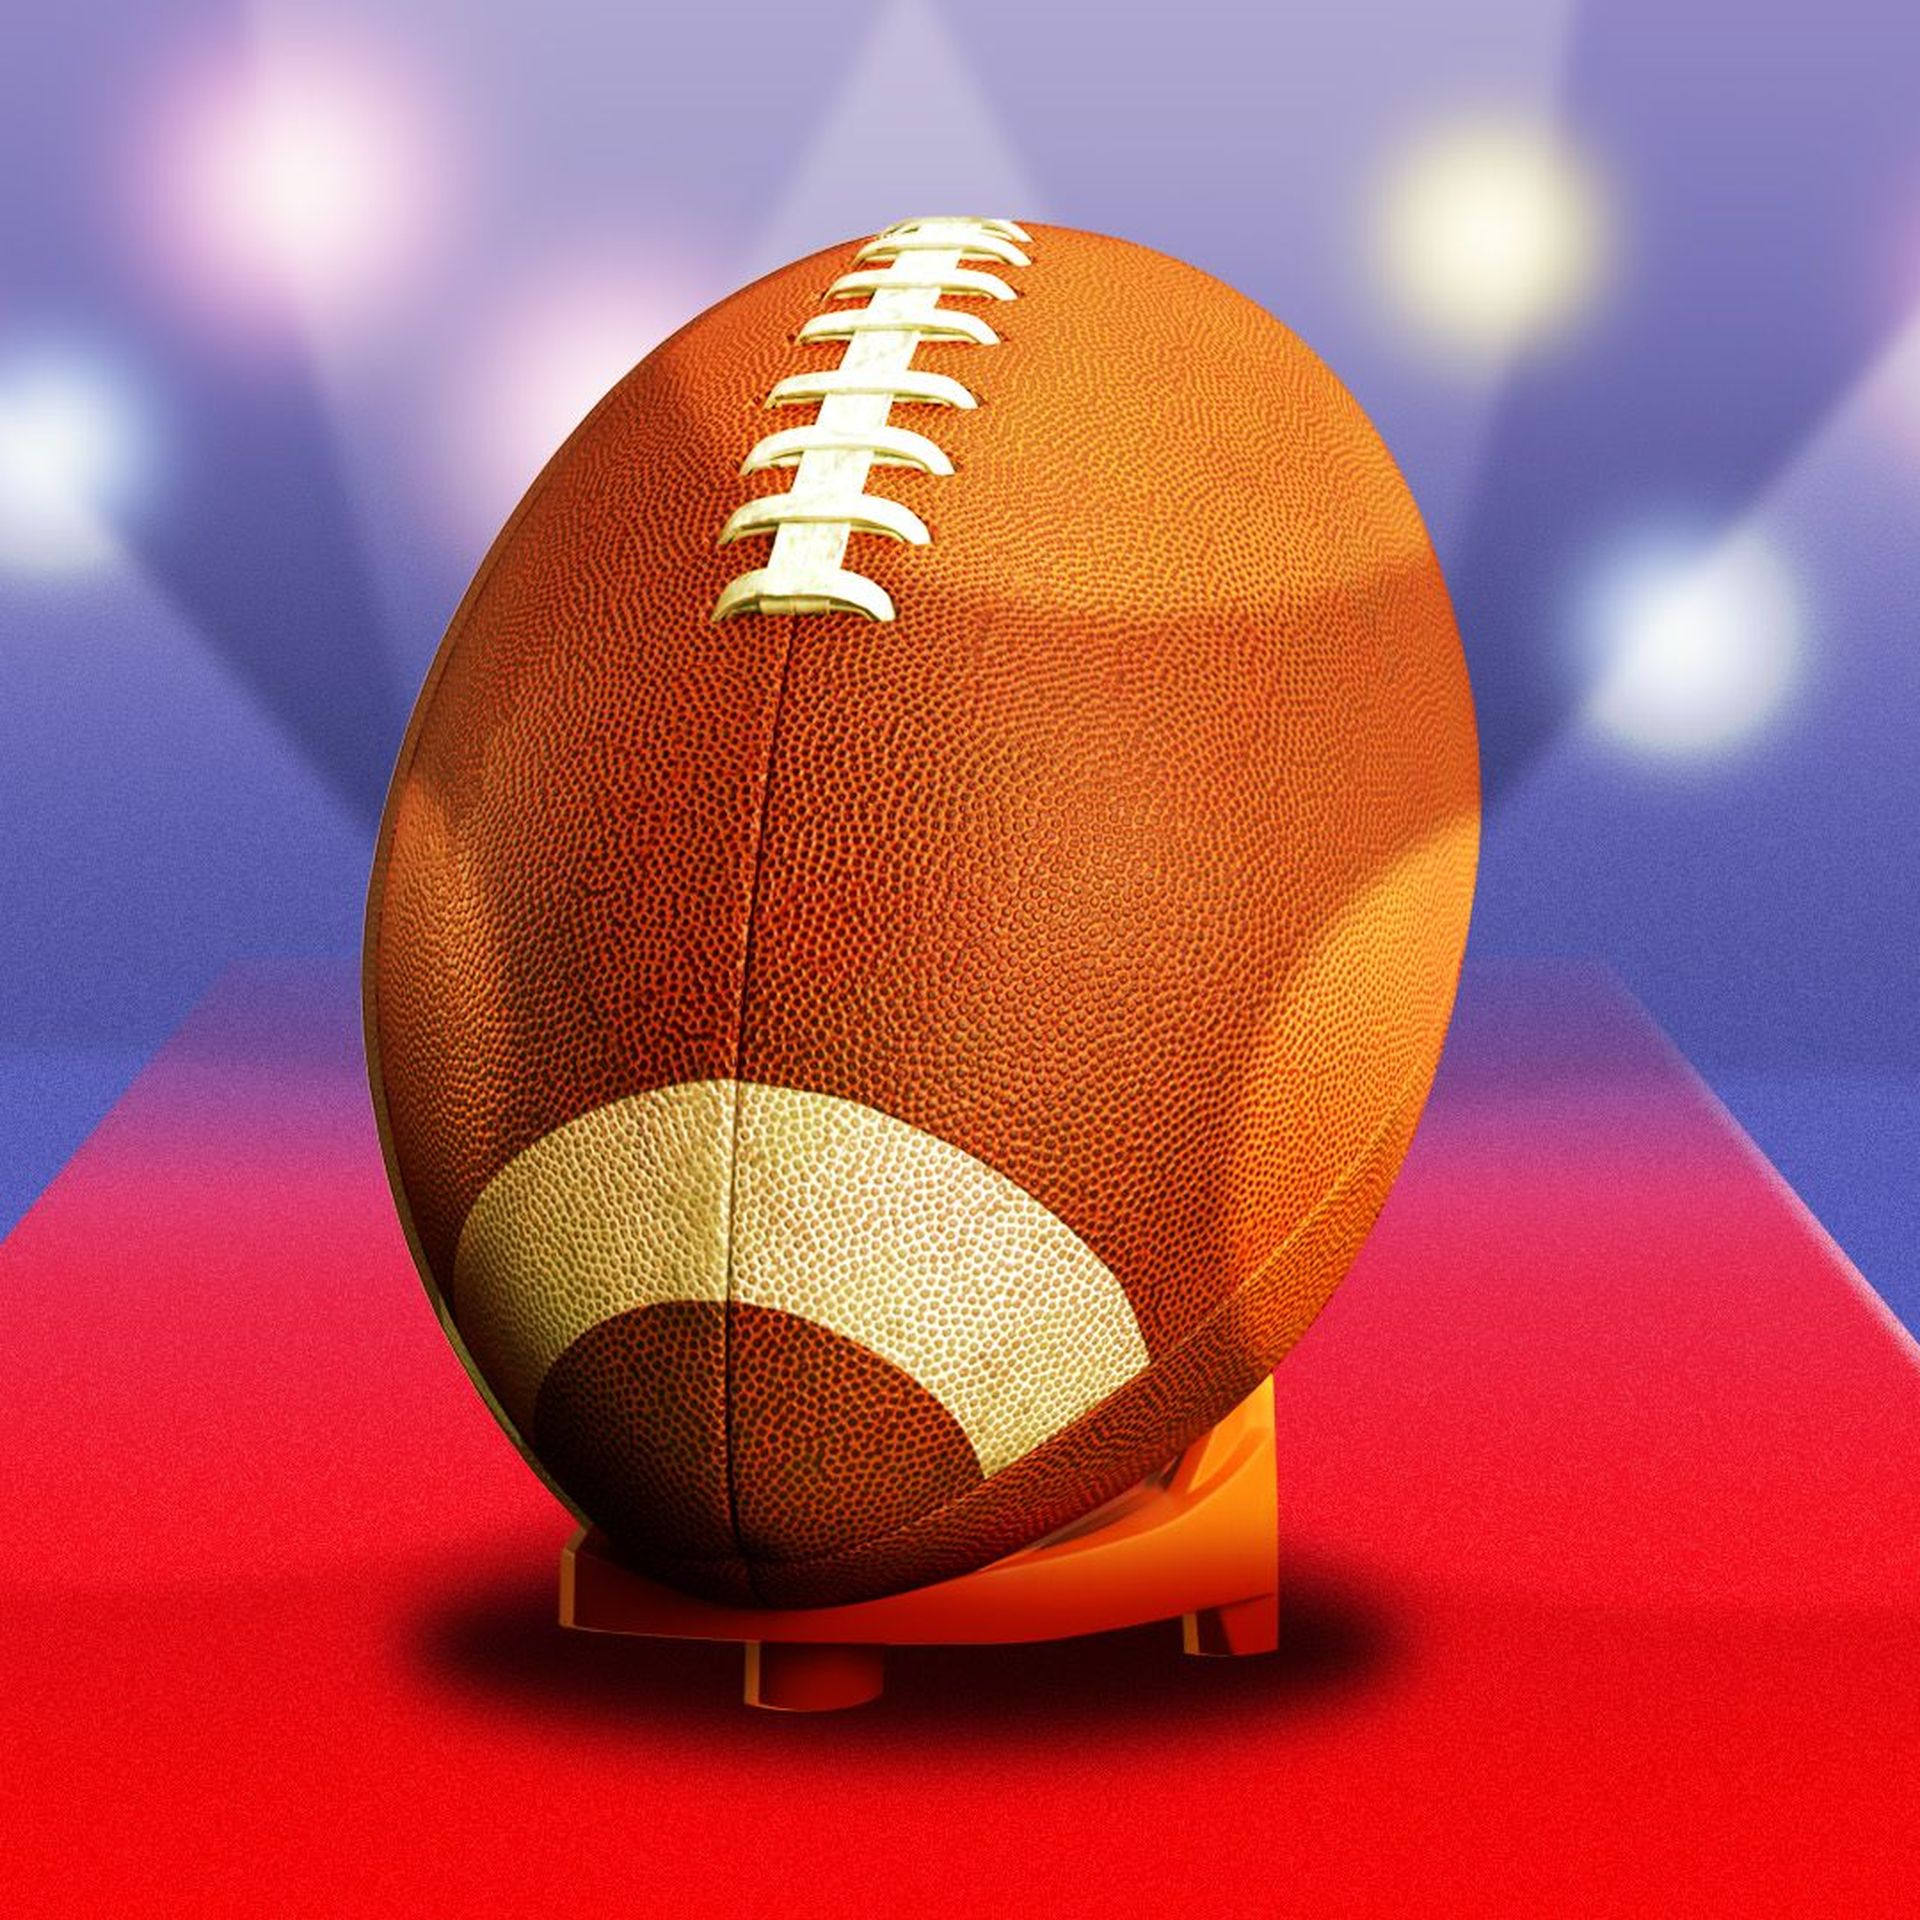 Illustration of a football on a red carpet